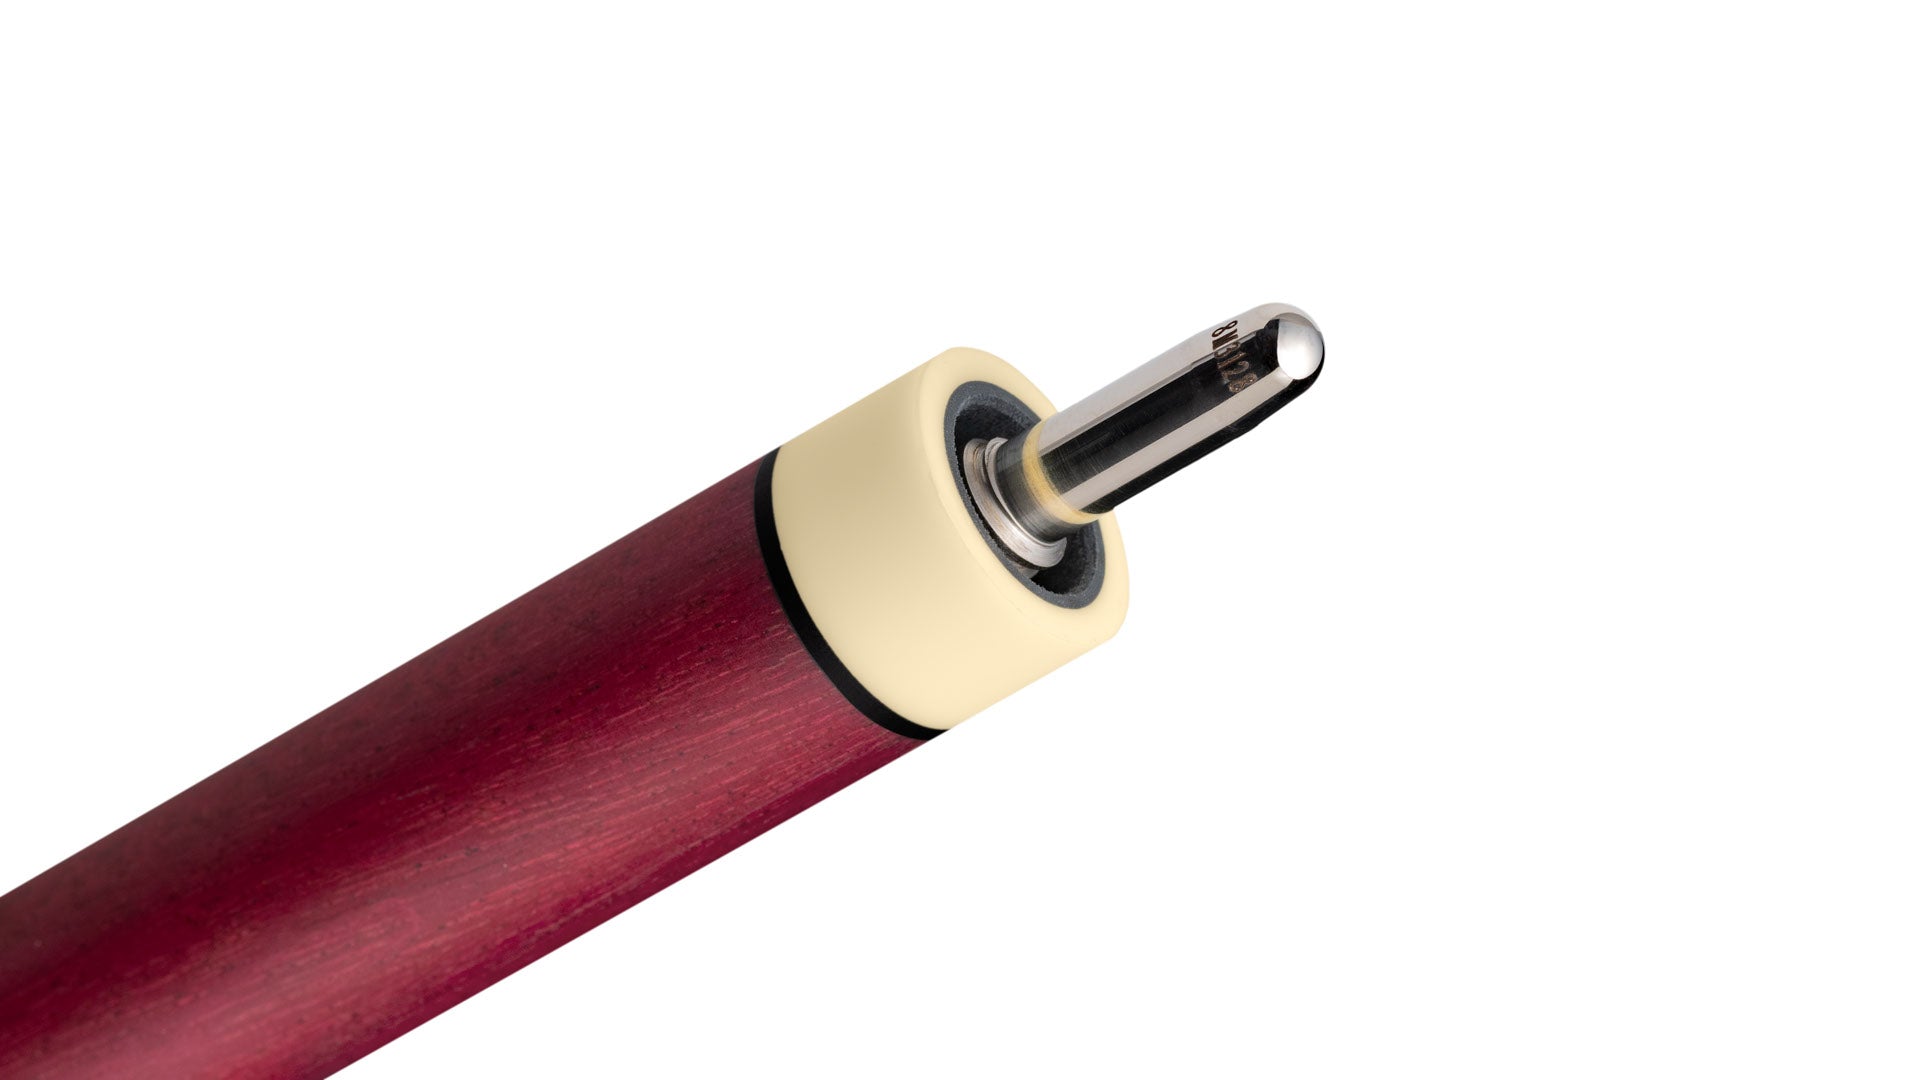 PREDATOR 8-POINT SNEAKY PETE POOL CUE - PURPLE HEART/CURLY - ELEPHANT PATTERN LEATHER WRAP (SHAFT NOT INCLUDED)